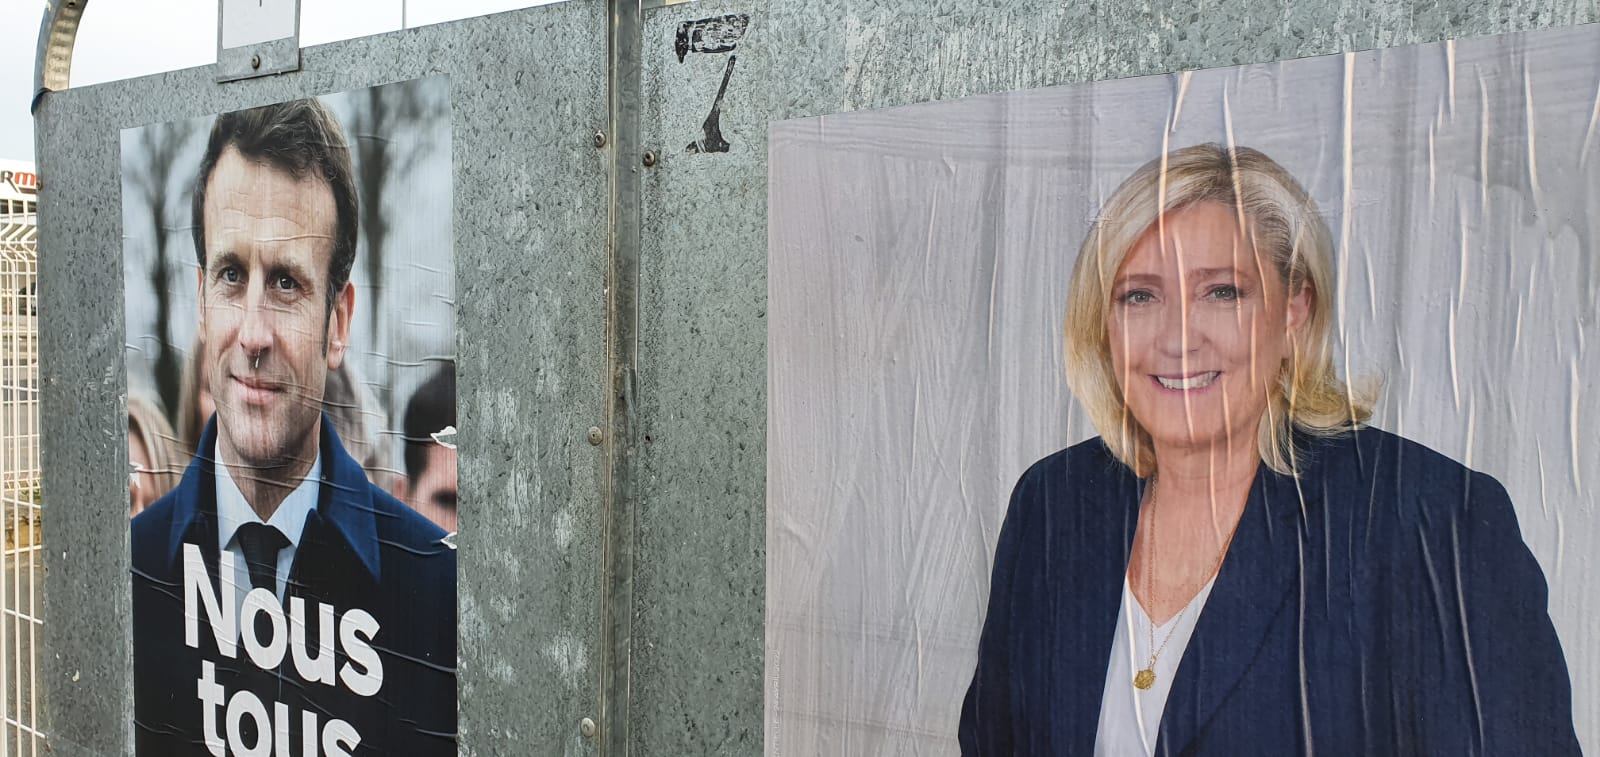 Campaign posters showing Macron and Le Pen in Calais (MEE/Frank Andrews)